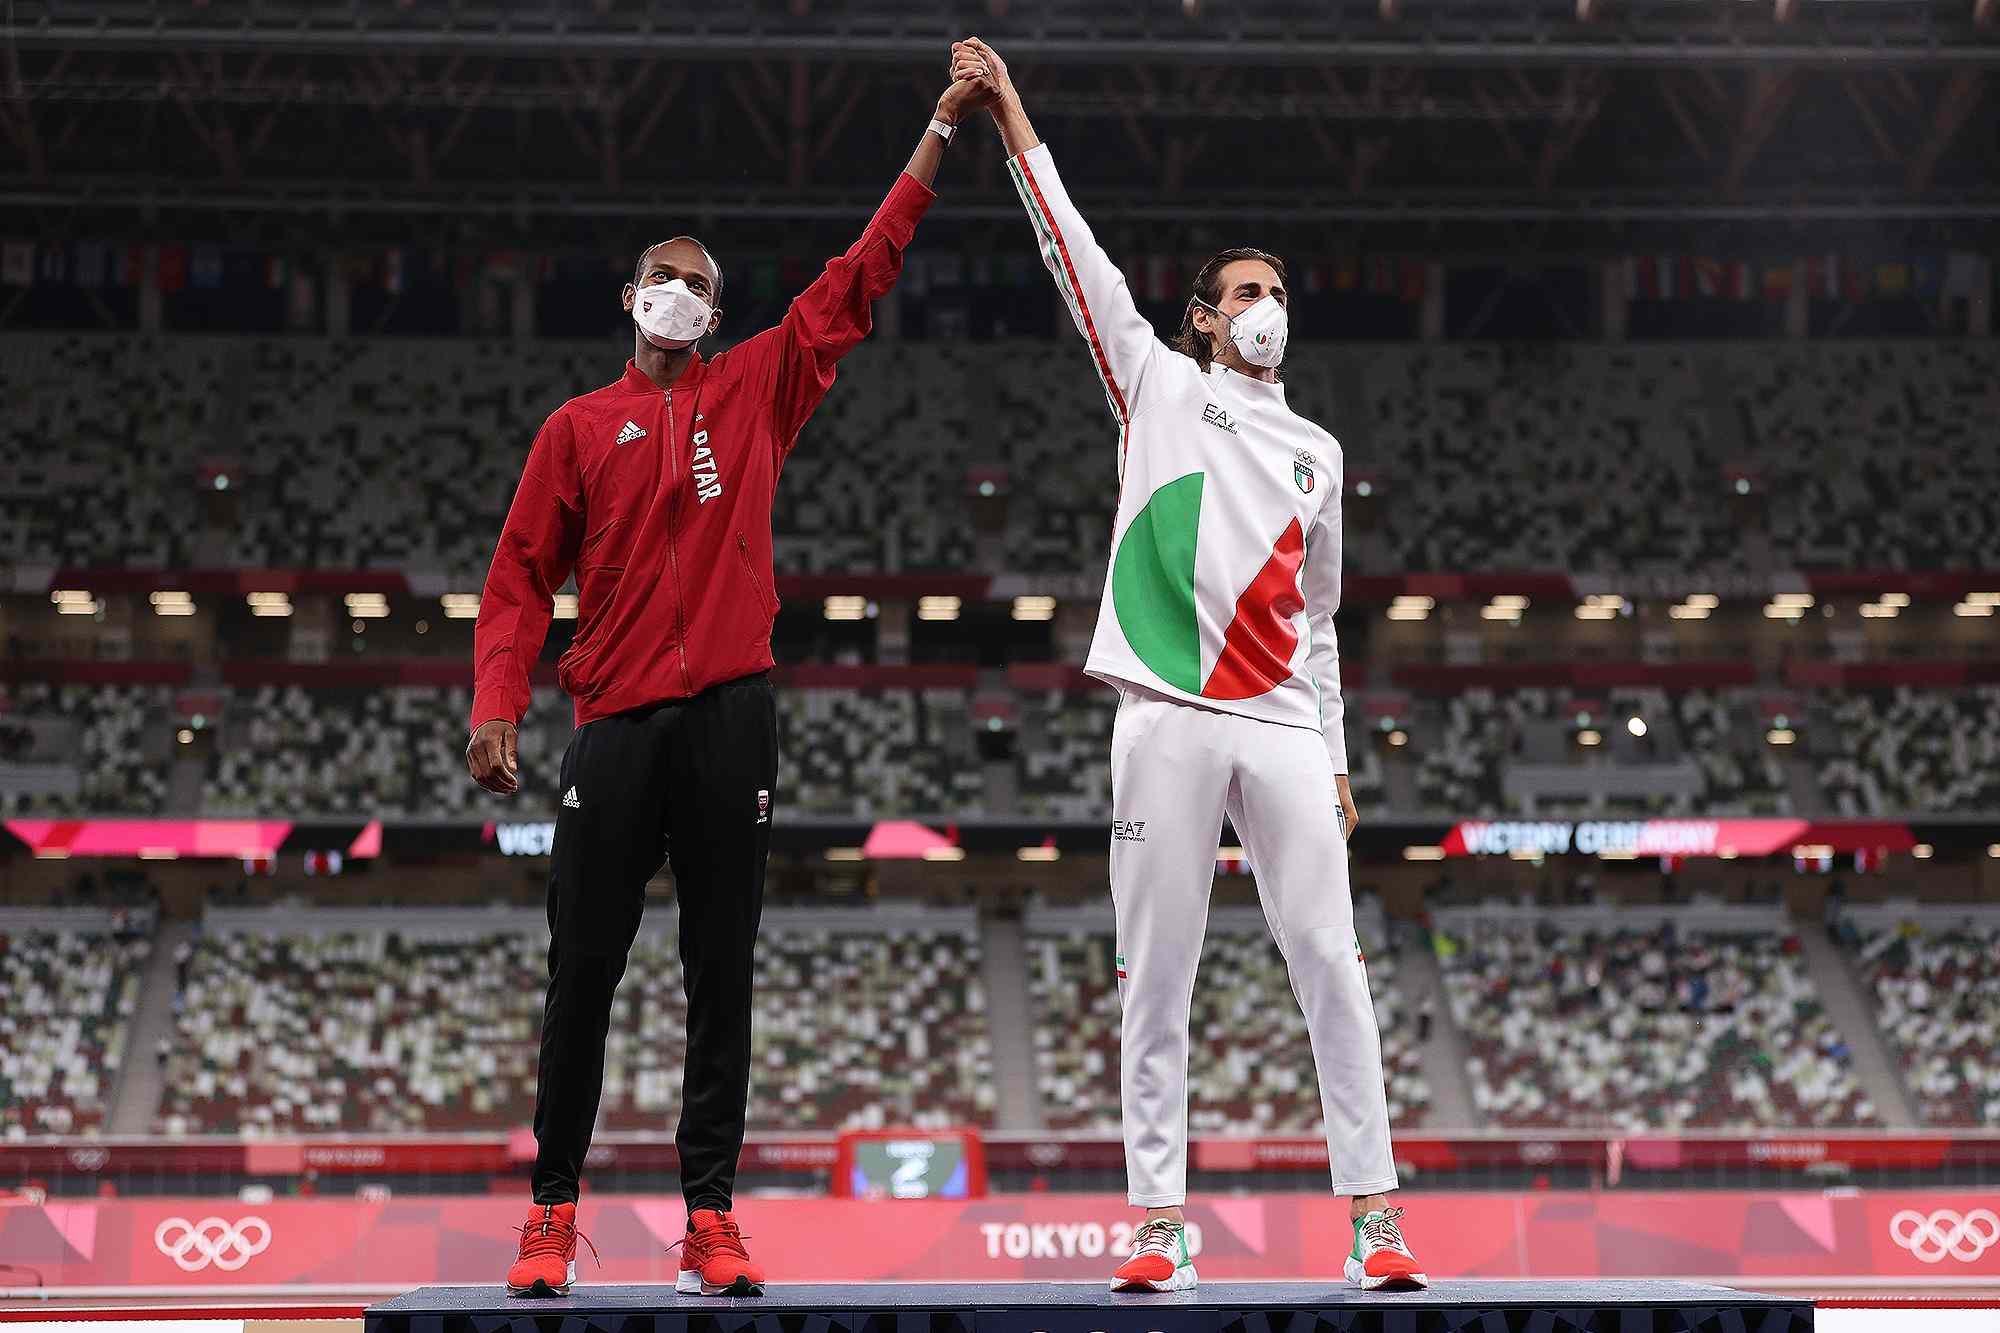 Joint gold medalists Mutaz Essa Barshim of Team Qatar and Gianmarco Tamberi of Team Italy celebrate on the podium during the medal ceremony for the Men's High Jump on day ten of the Tokyo 2020 Olympic Games at Olympic Stadium on August 02, 2021 in Tokyo, Japan. 